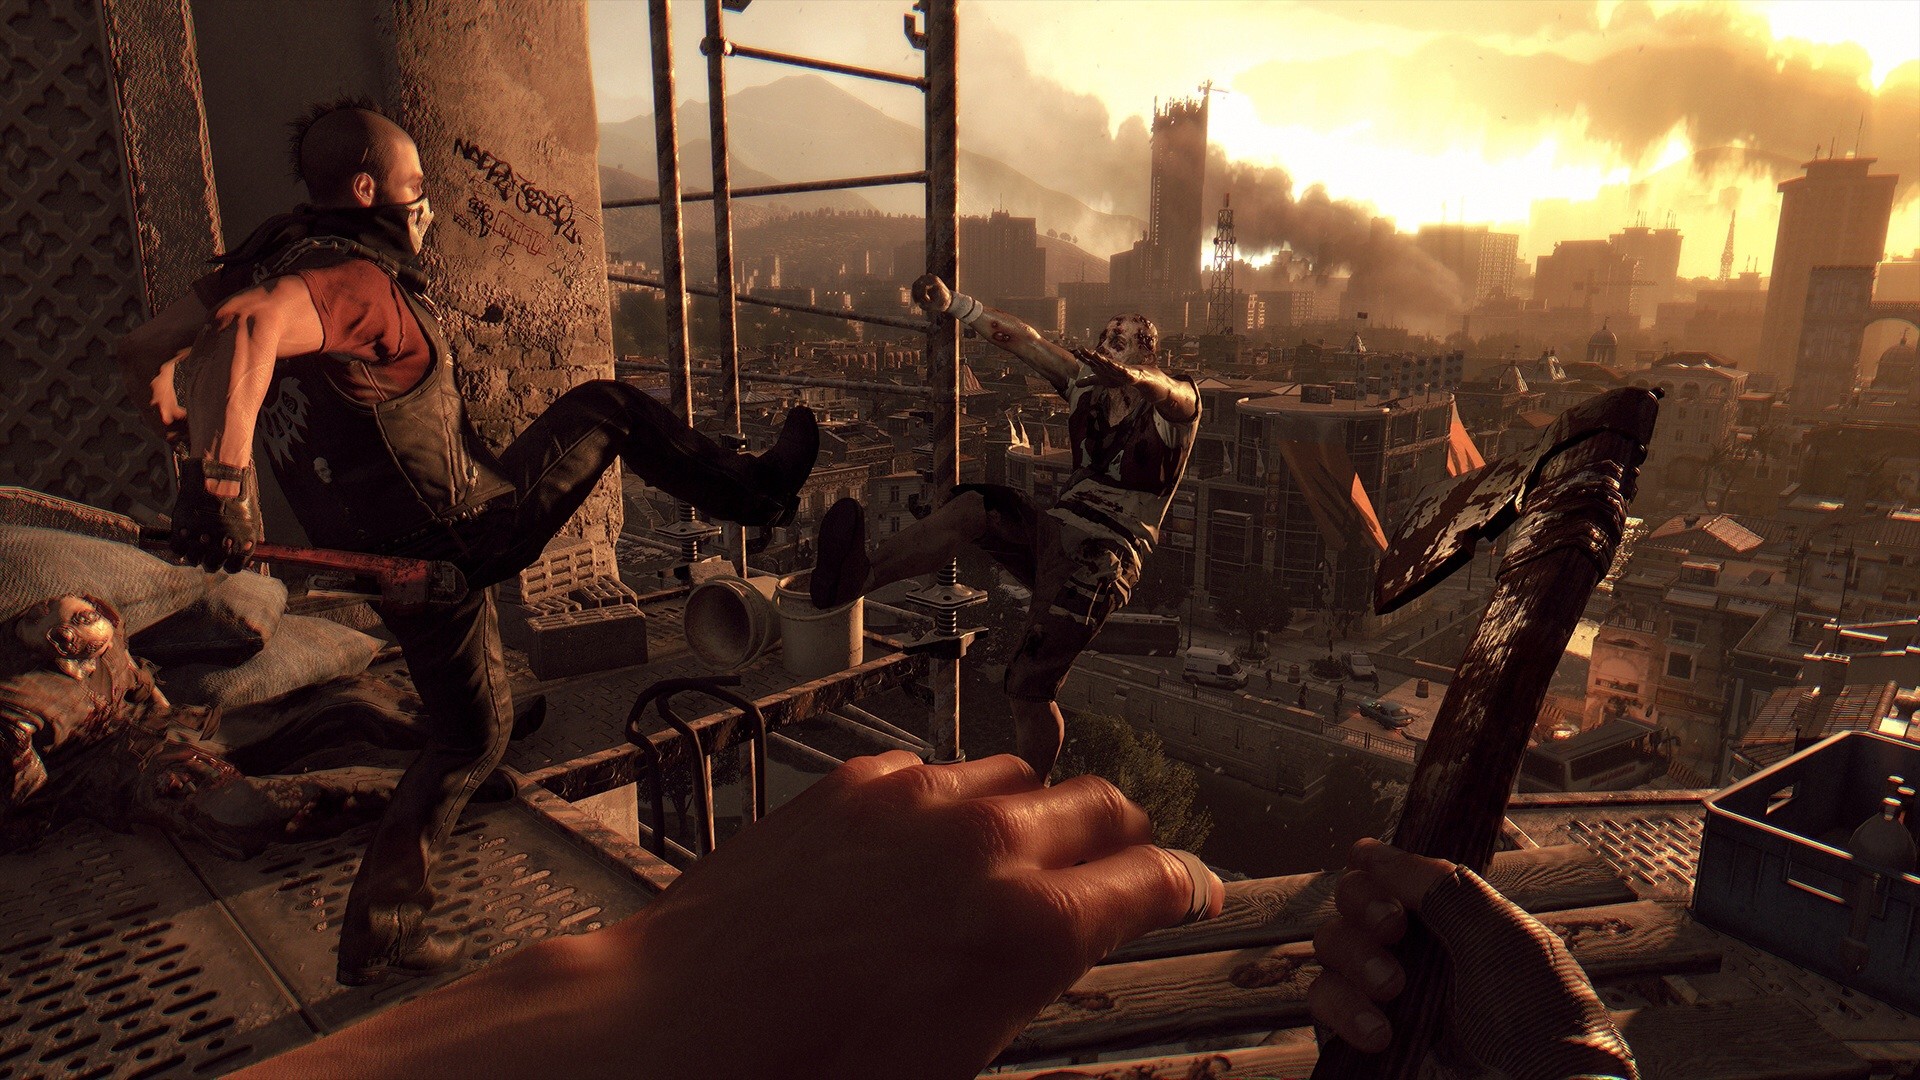 1920x1080 Dying Light images Dying Light HD wallpaper and background photos